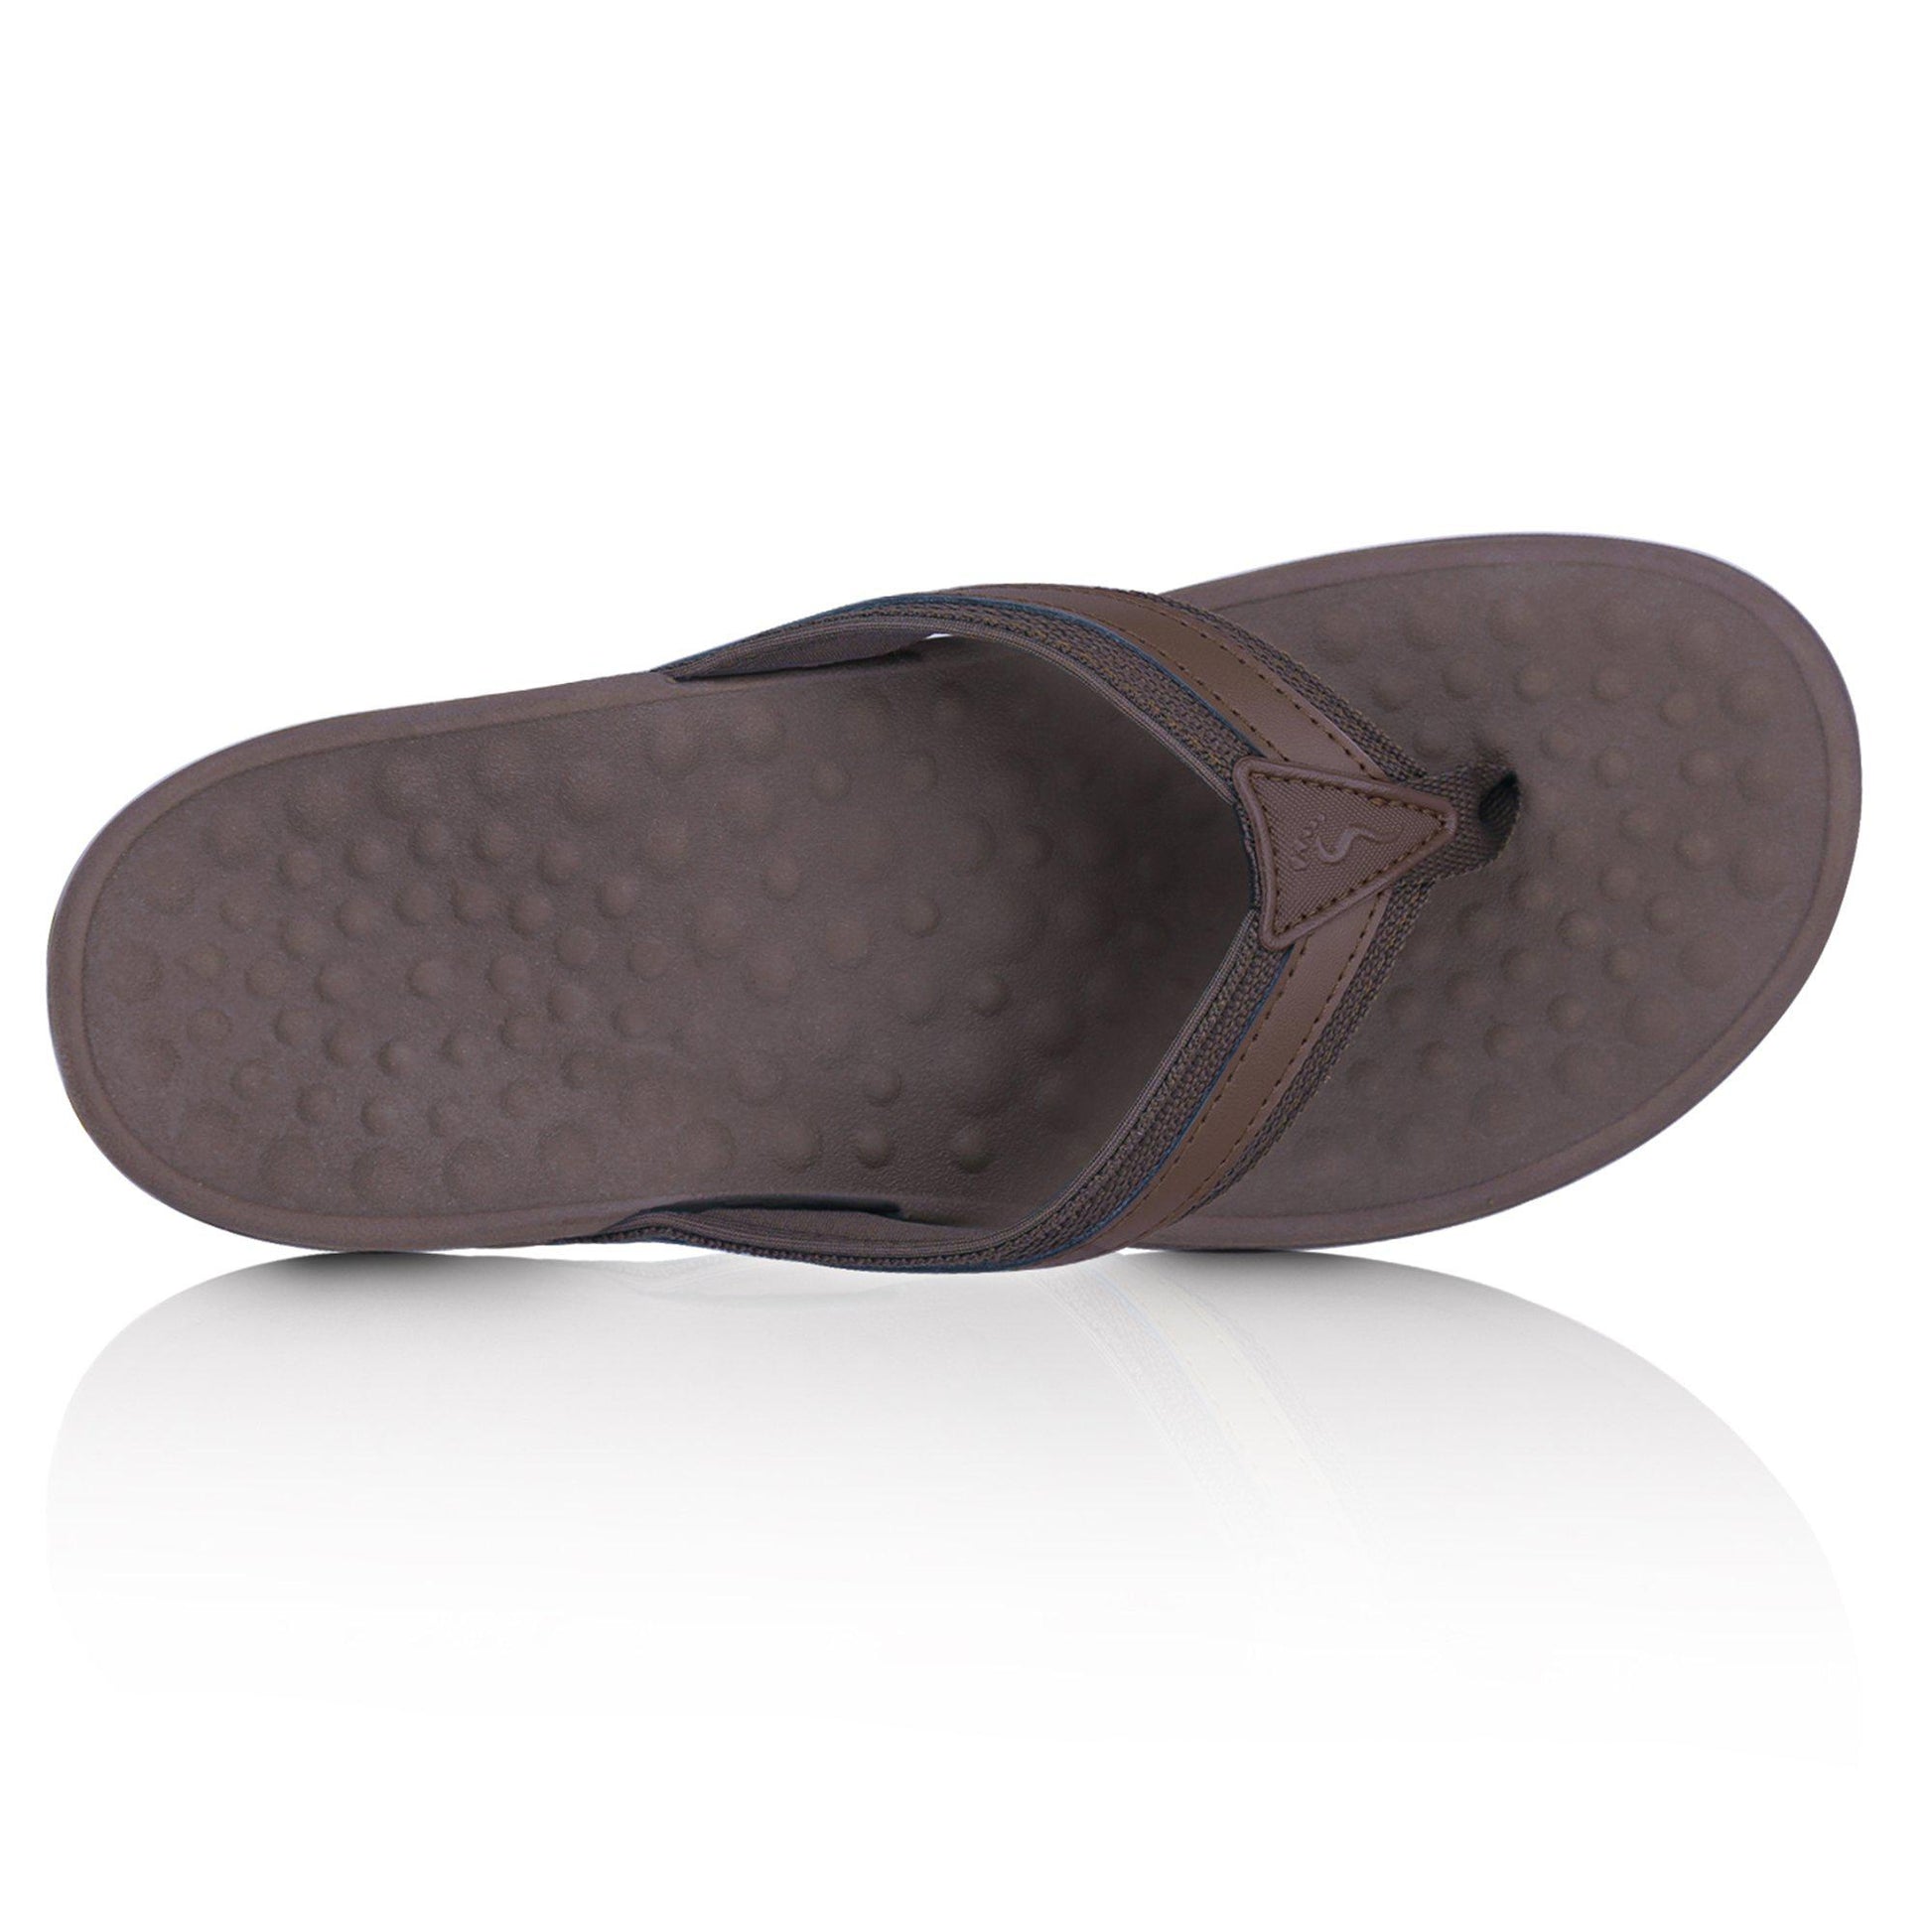 Arch Support Orthotic Sandals